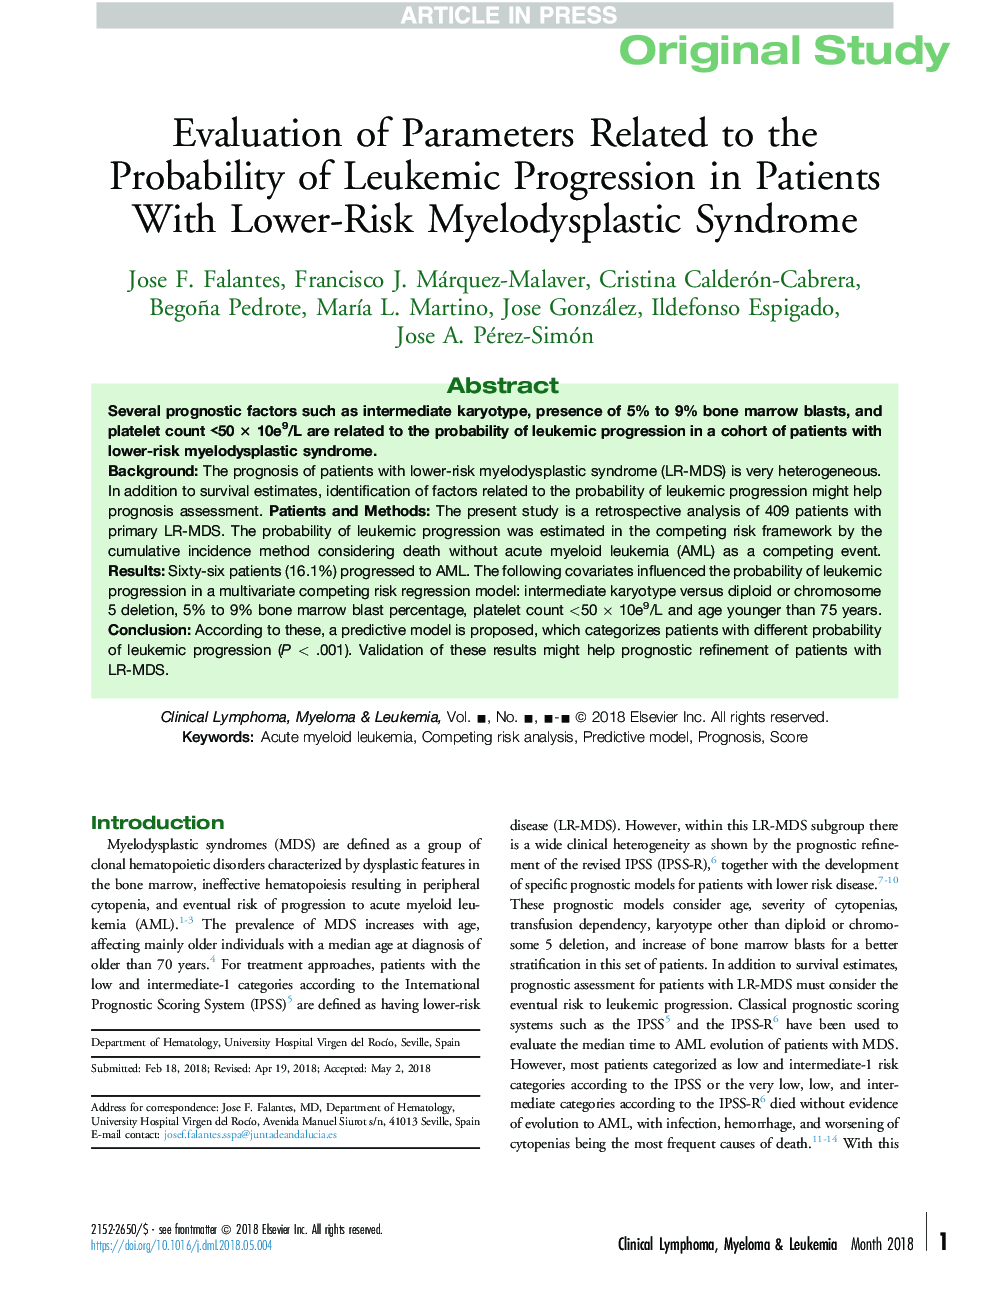 Evaluation of Parameters Related to the Probability of Leukemic Progression in Patients With Lower-Risk Myelodysplastic Syndrome